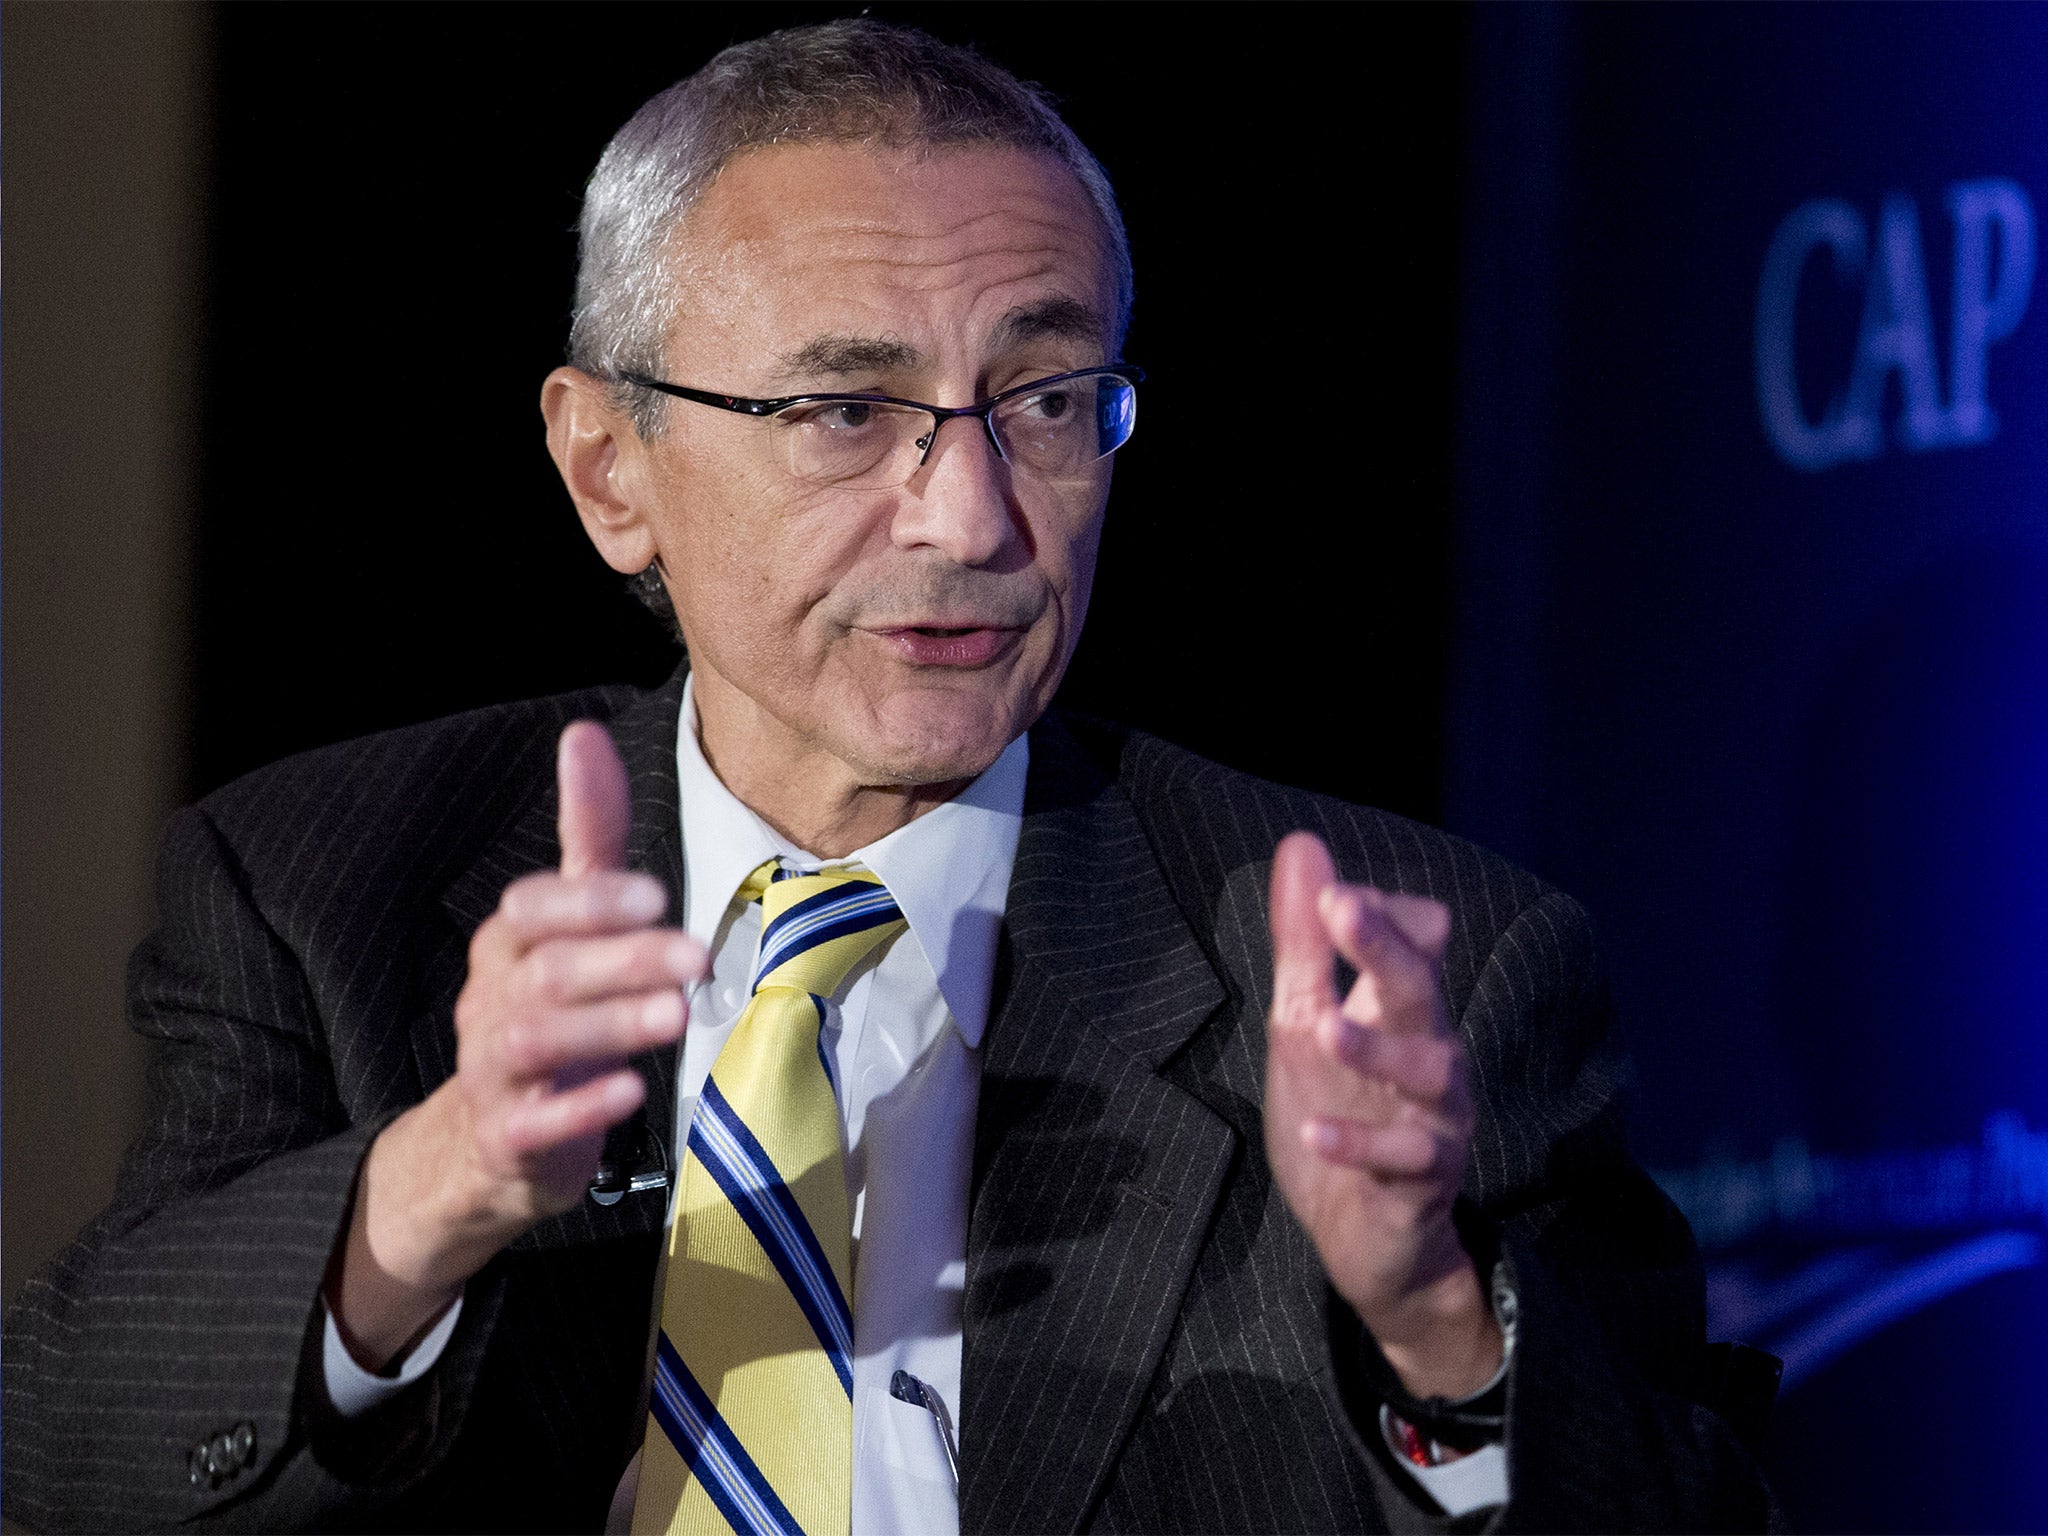 Podesta's vacation isn't keeping him from punching back